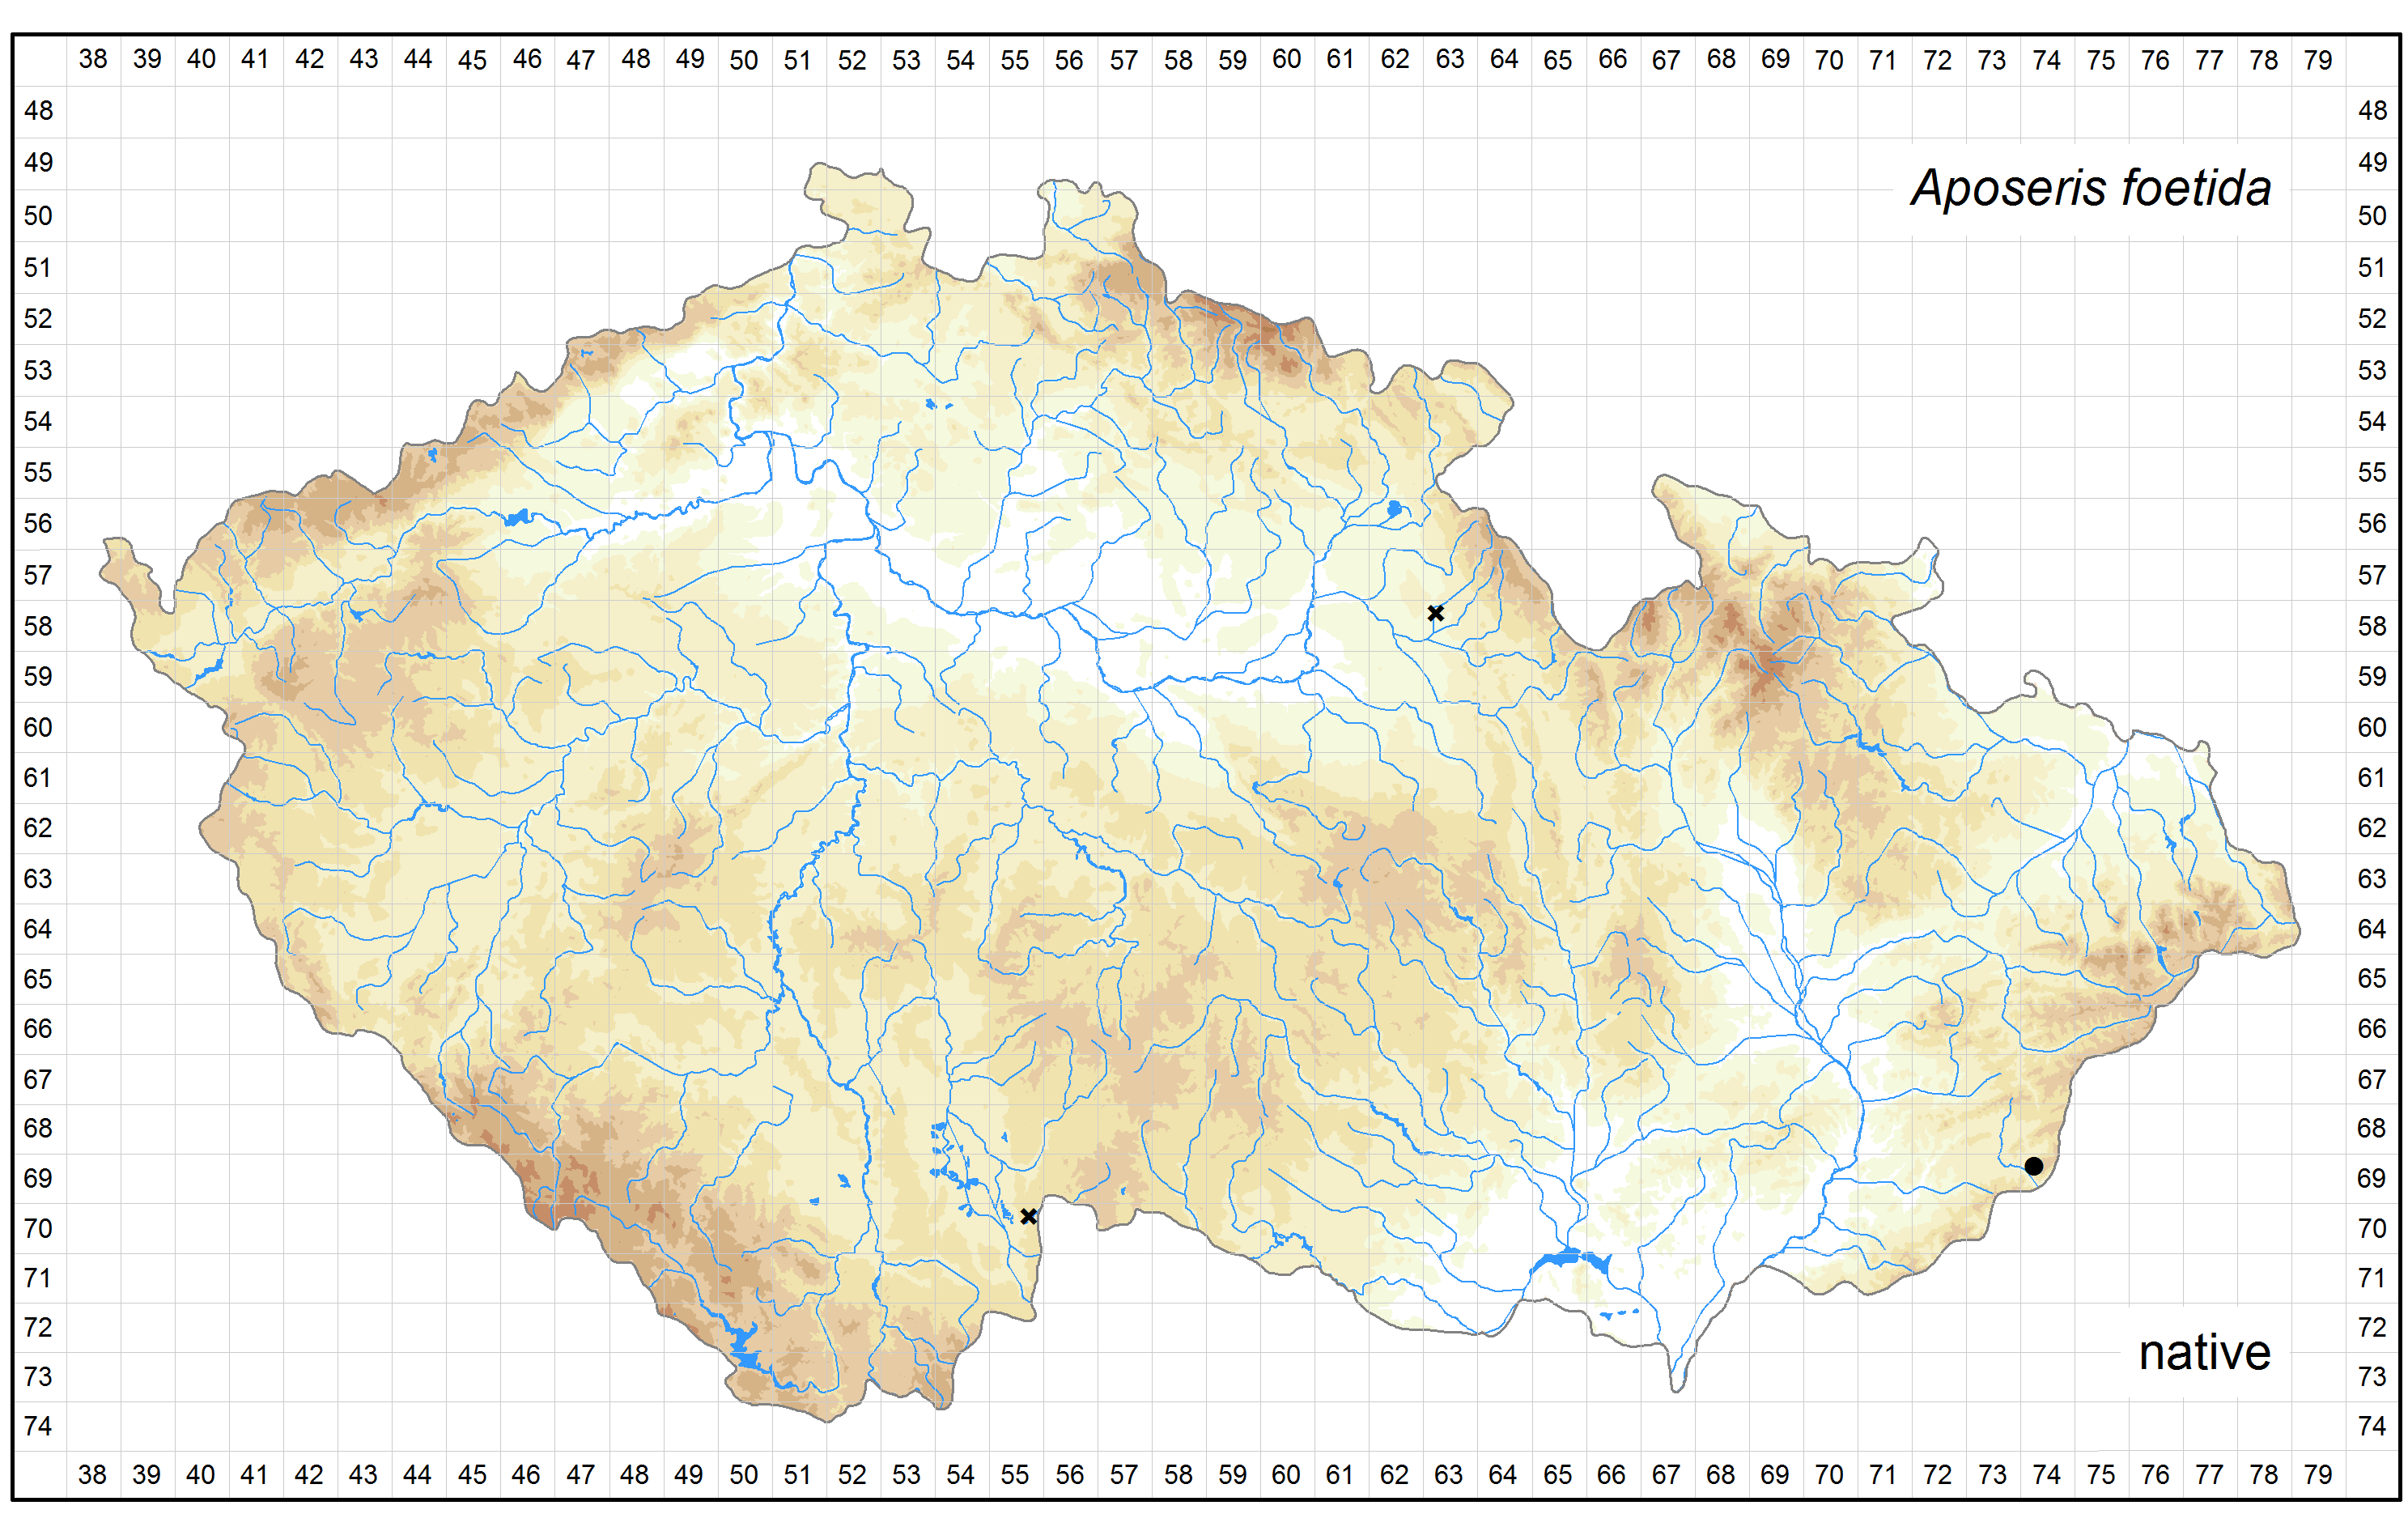 Distribution of Aposeris foetida in the Czech Republic Author of the map: Jitka Štěpánková Map produced on: 12-05-2016 Database records used for producing the distribution map of Aposeris foetida